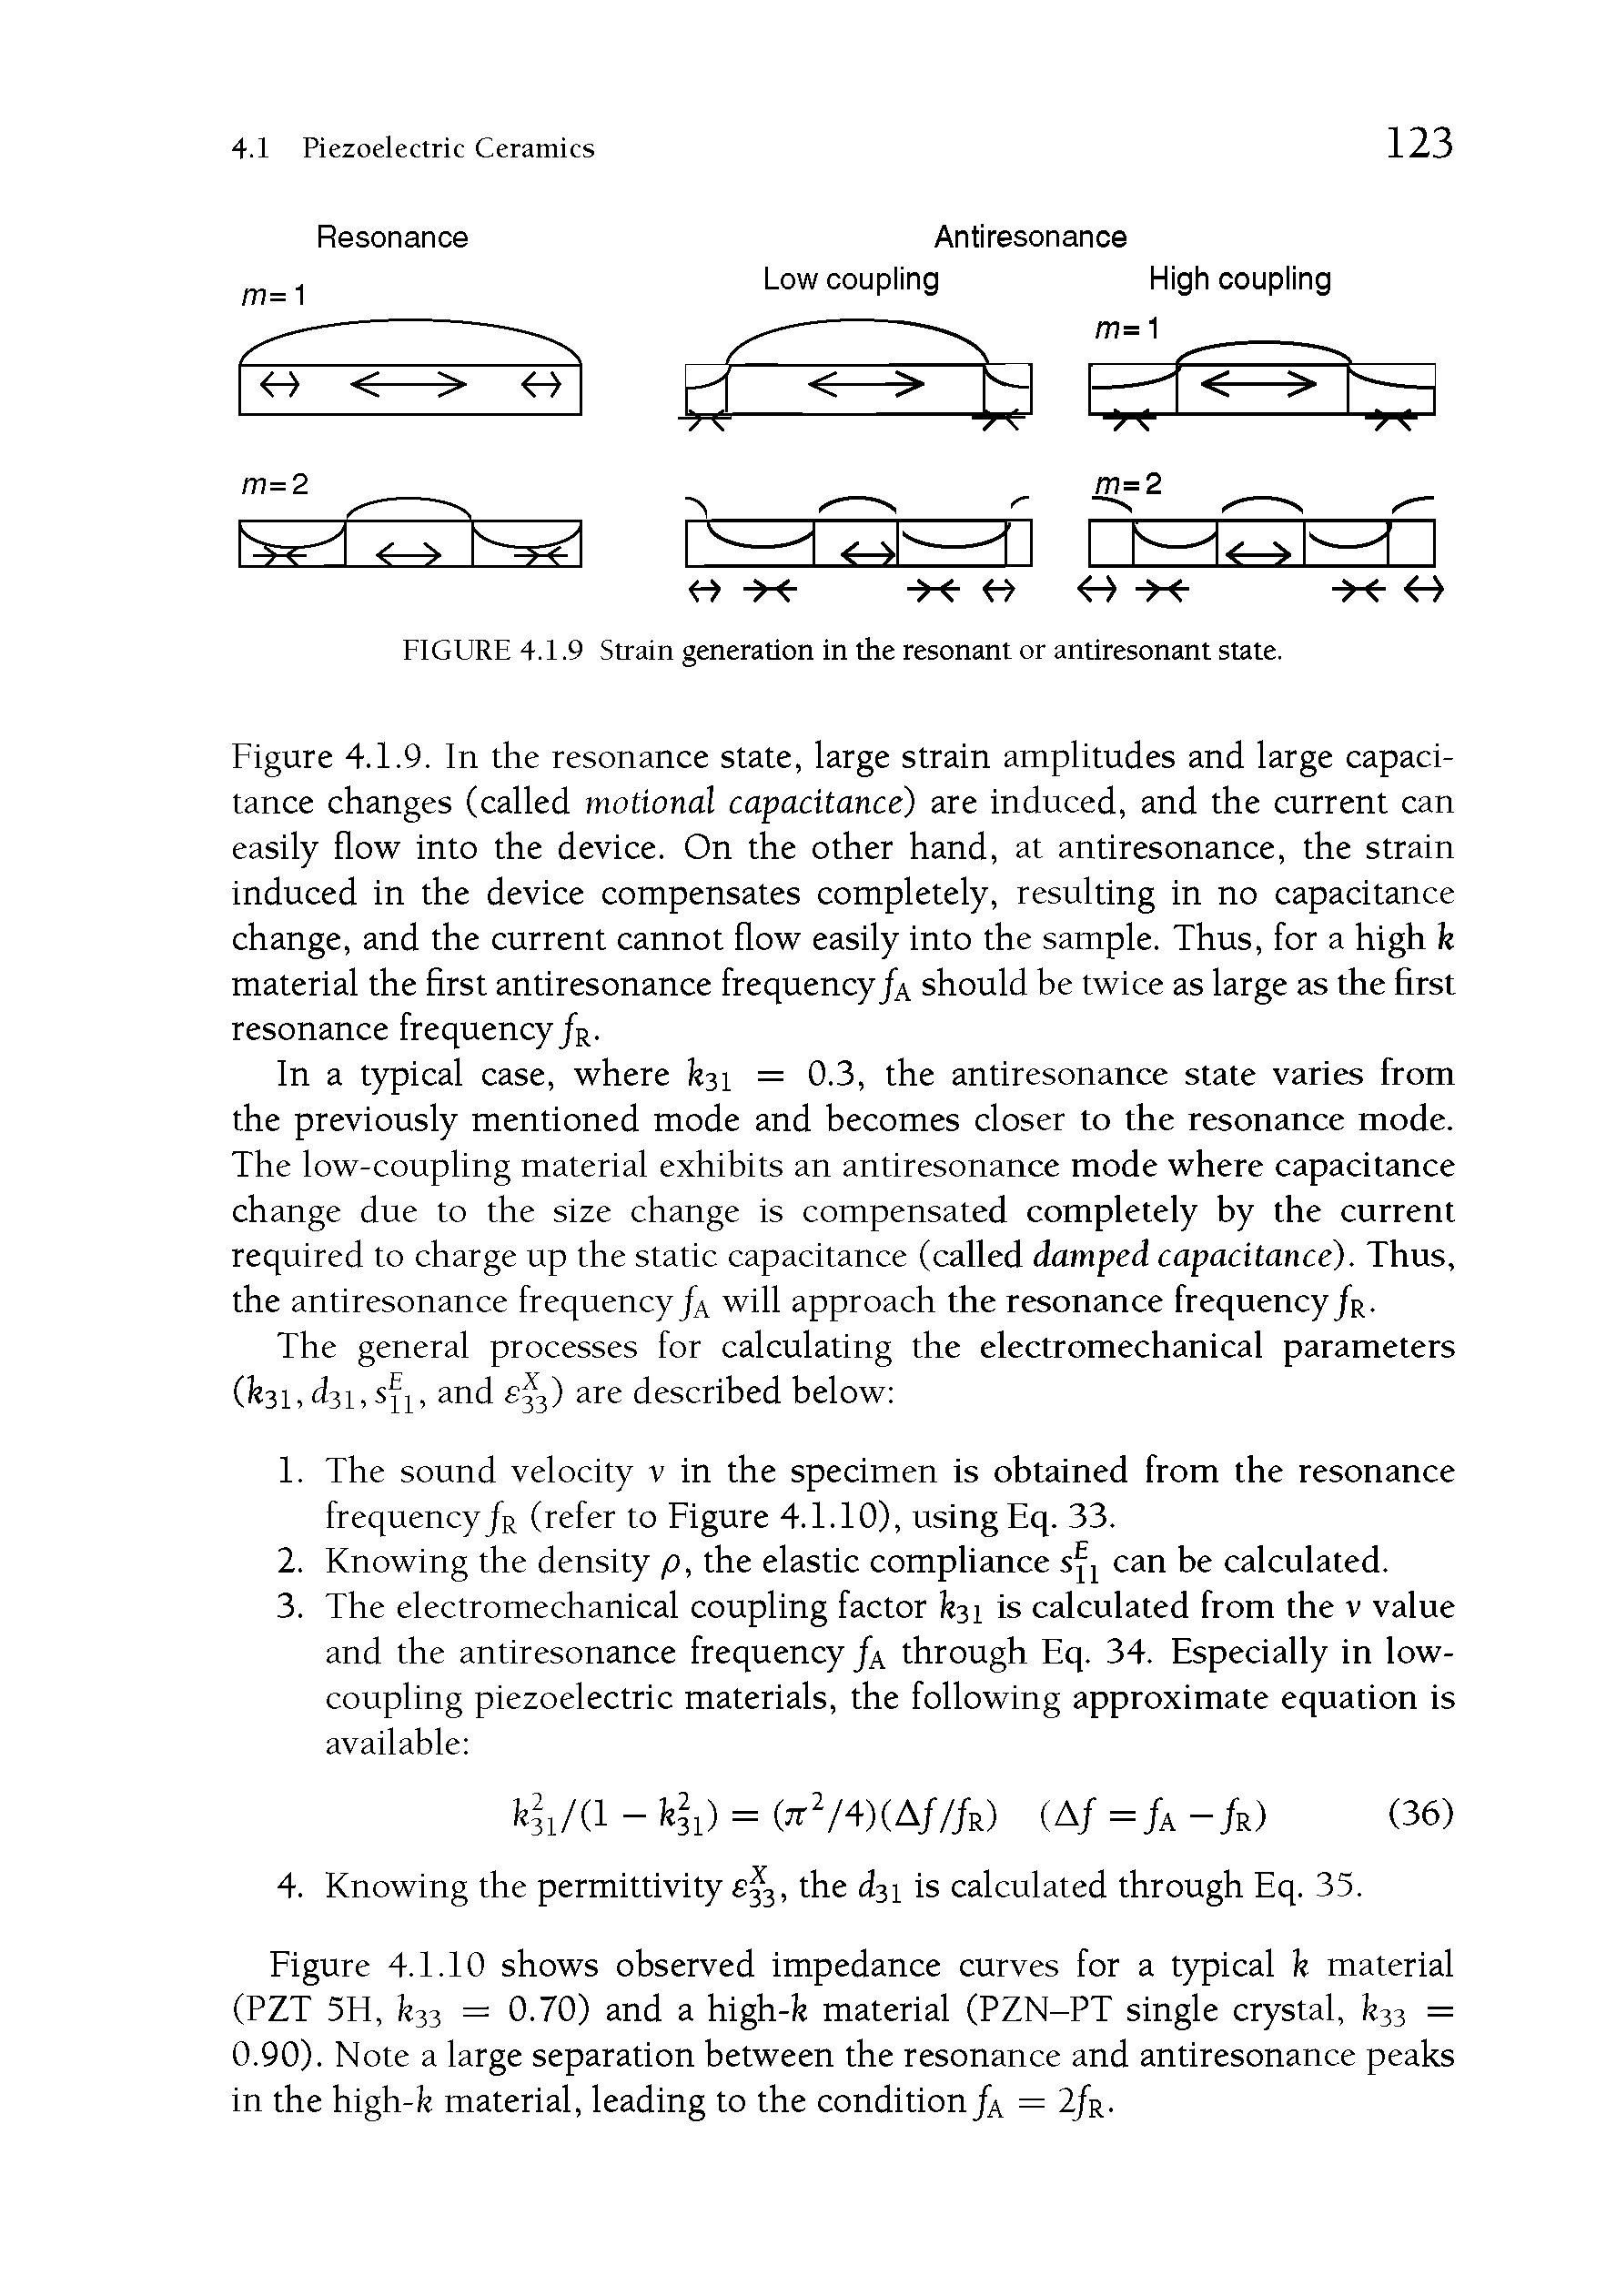 Figure 4.1.9. In the resonance state, large strain amplitudes and large capacitance changes (called motional capacitance) are induced, and the current can easily flow into the device. On the other hand, at antiresonance, the strain induced in the device compensates completely, resulting in no capacitance change, and the current cannot flow easily into the sample. Thus, for a high k material the first antiresonance frequency/a should be twice as large as the first resonance frequency/r.